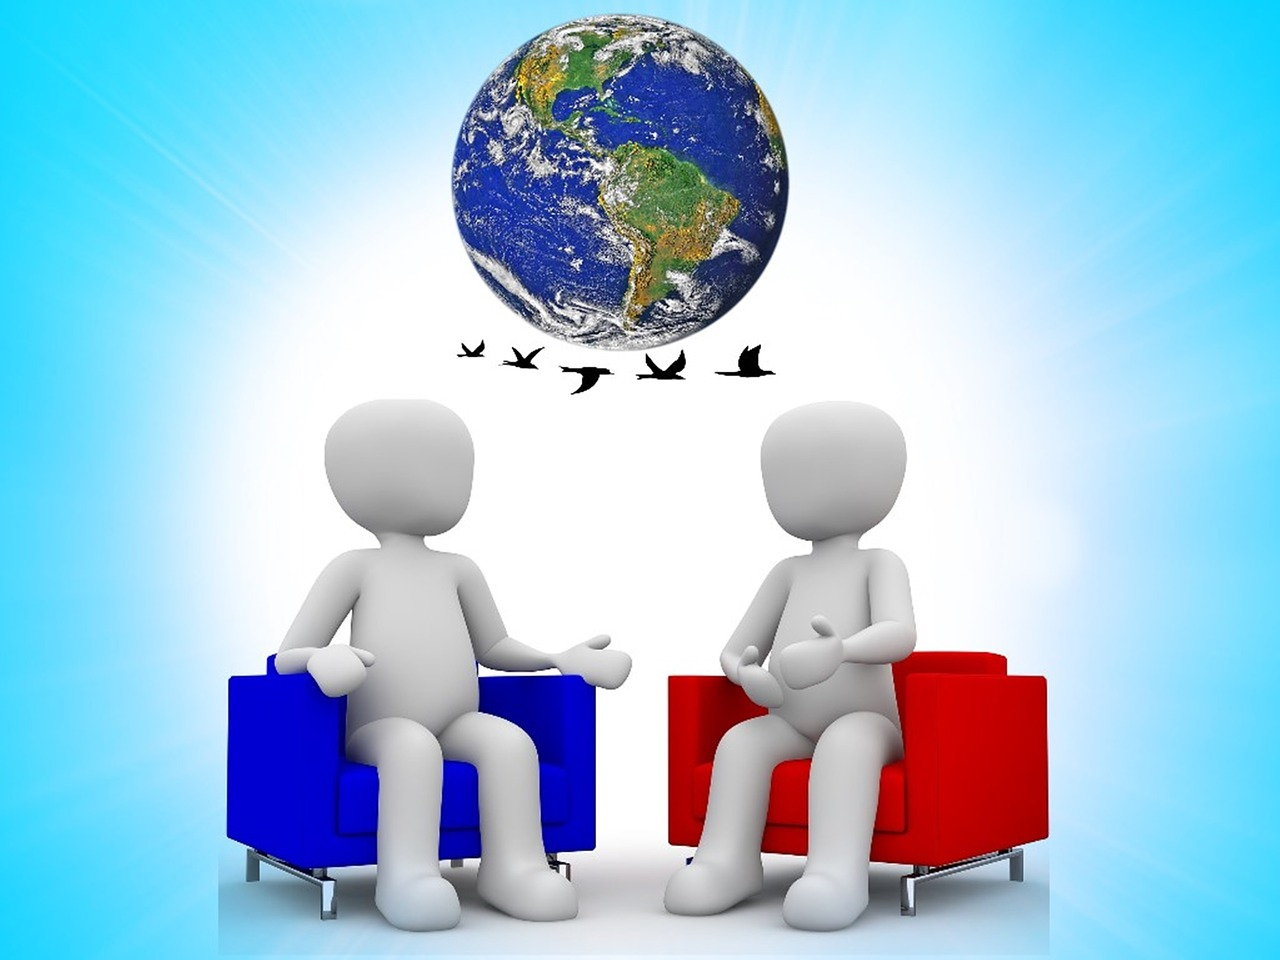 Graphic of two seated people talking under a globe and silhouettes of birds